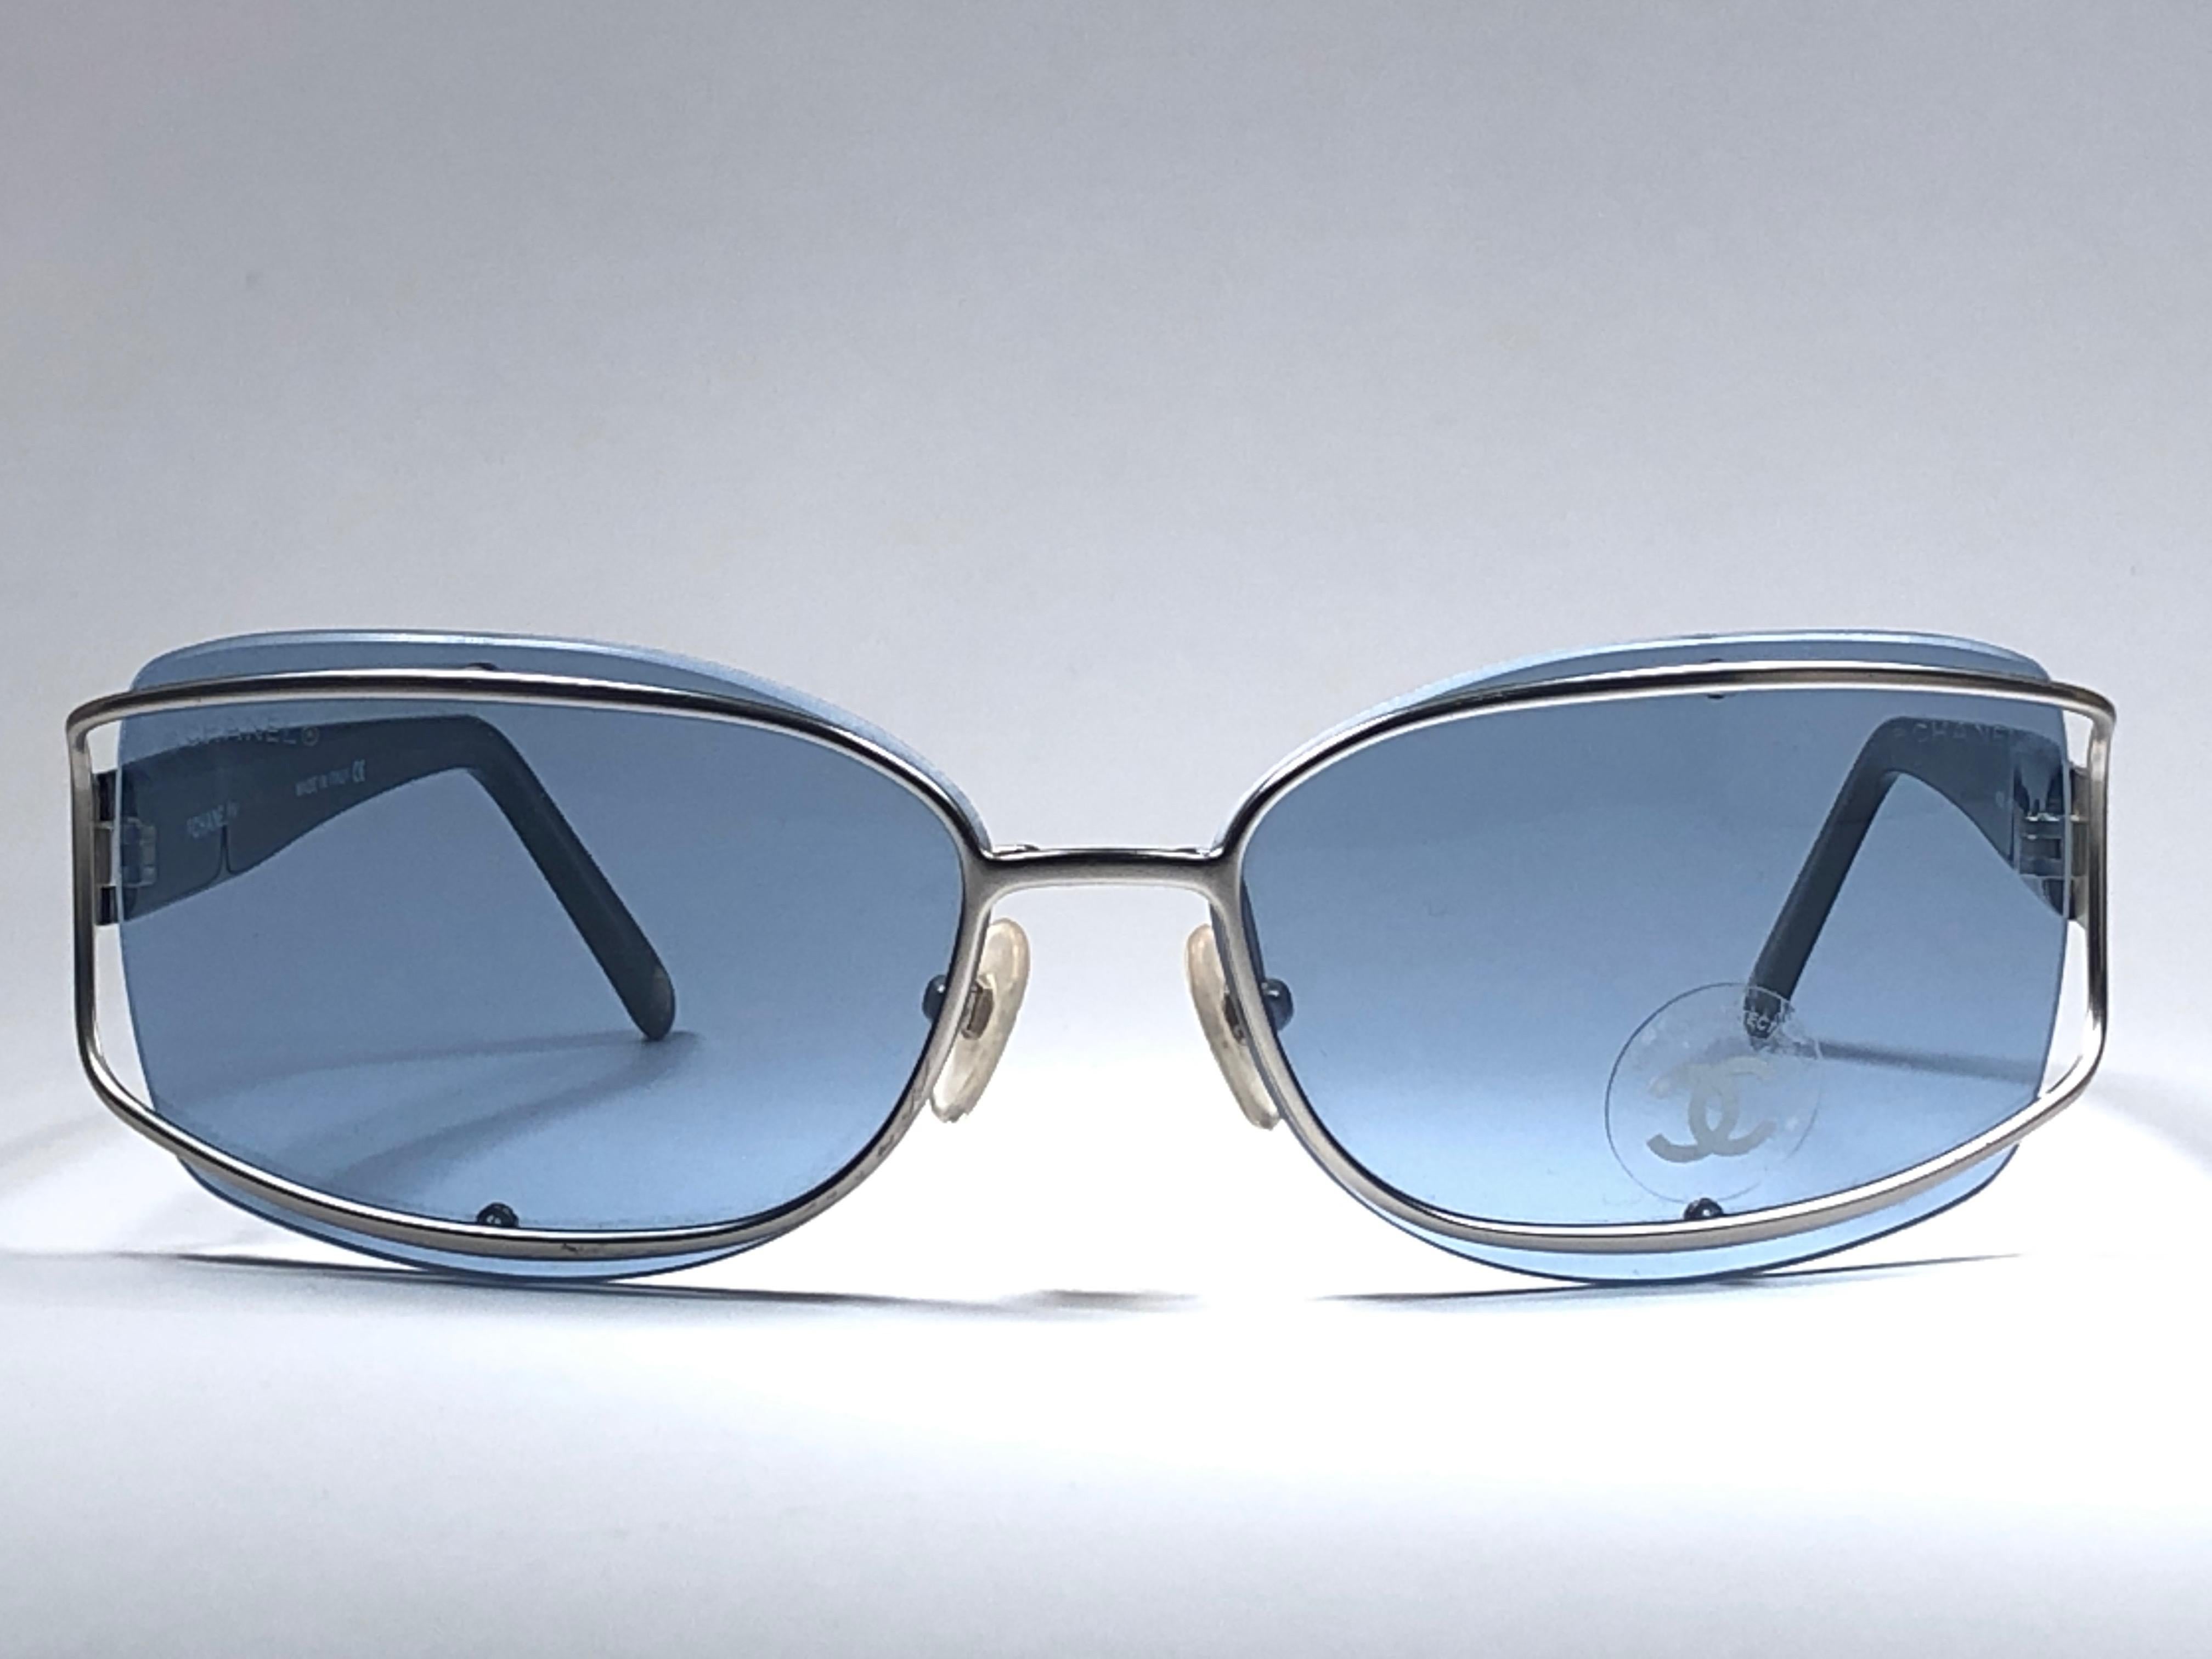 Vintage rare Chanel sunglasses.

This pair of Chanel sunglasses is an absolute showstopper.

This pair may show minor sign of wear due to storage.

FRONT : 14.5 CMS
LENS HEIGHT : 4.6 CMS
LENS WIDTH : 6.6 CMS